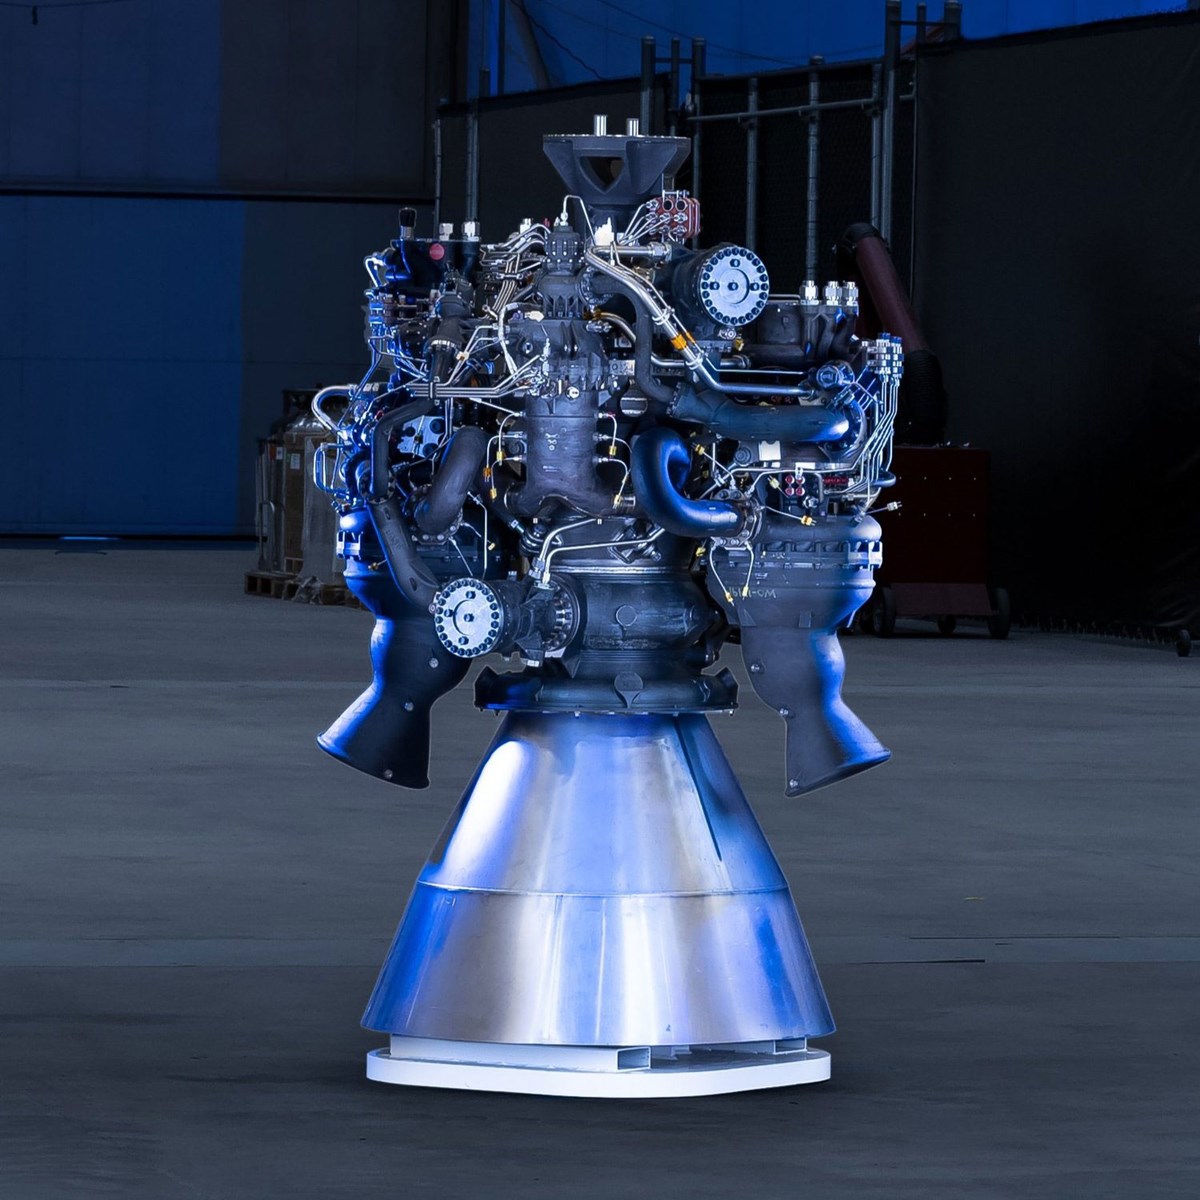 Metal 3-D printed rocket engine placed on the ground. 